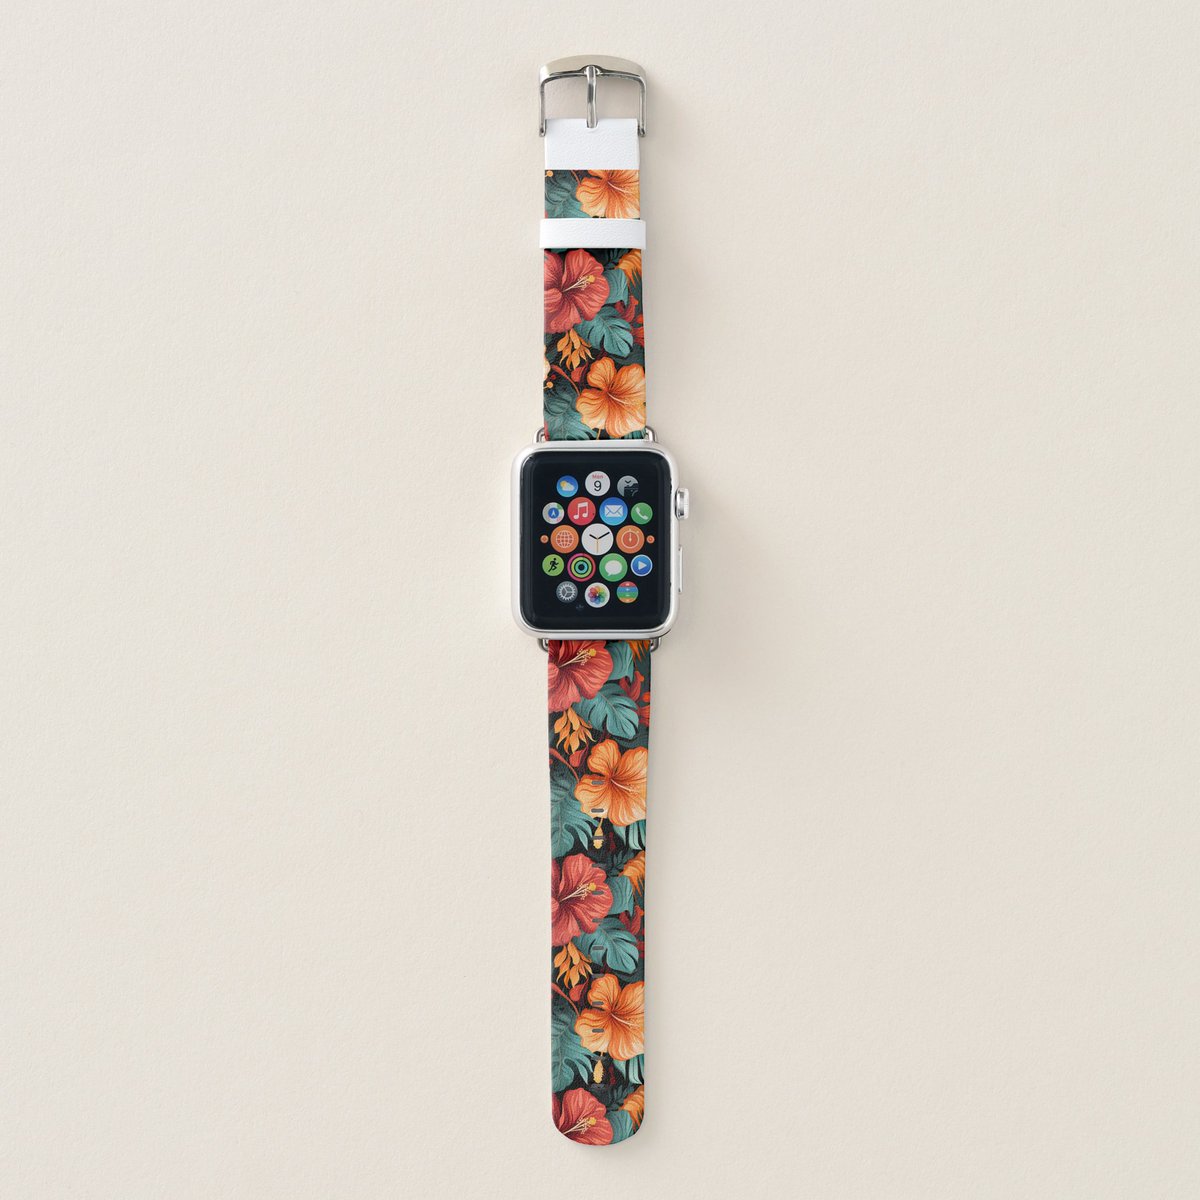 Spring vibes on your wrist! Our floral Apple Watch bands bring the essence of bloom and beauty to every outfit.
-
-
-
#floral #floraldesign #florals #floralillustration #flower #flowers #zazzle #teepublic #society6 #printify #applewatch #applewatchband #applewatchbands #watchband